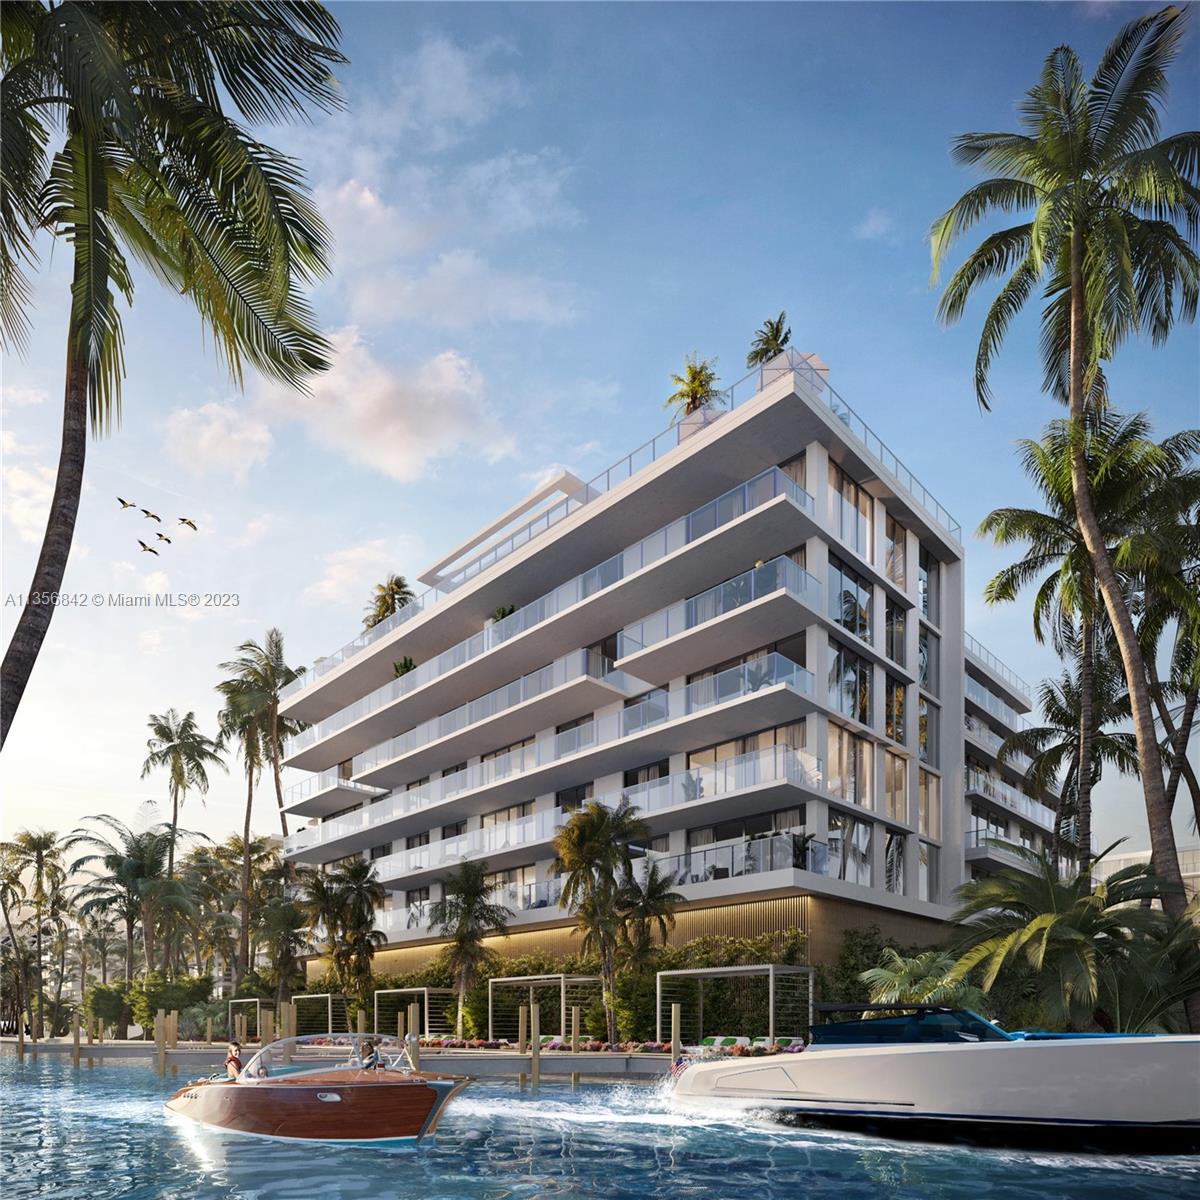 Origin Residences by Artefacto is a luxurious new development located in Bay Harbor Islands, Miami. The project consists of 27 exclusive residences, each designed with exquisite attention to detail and crafted with the finest materials. The interiors are designed by Artefacto, a renowned Brazilian luxury furniture brand known for its sophisticated and contemporary style. The building offers a range of amenities designed to enhance the residents' lifestyle. There is a rooftop pool and deck, a fitness center, a private marina with 10 boat slips, providing easy access to the bay, and more. 
Bay Harbor Islands is a sought-after location known for its upscale living, excellent schools, and proximity to some of the best shopping, dining, and entertainment in Miami.